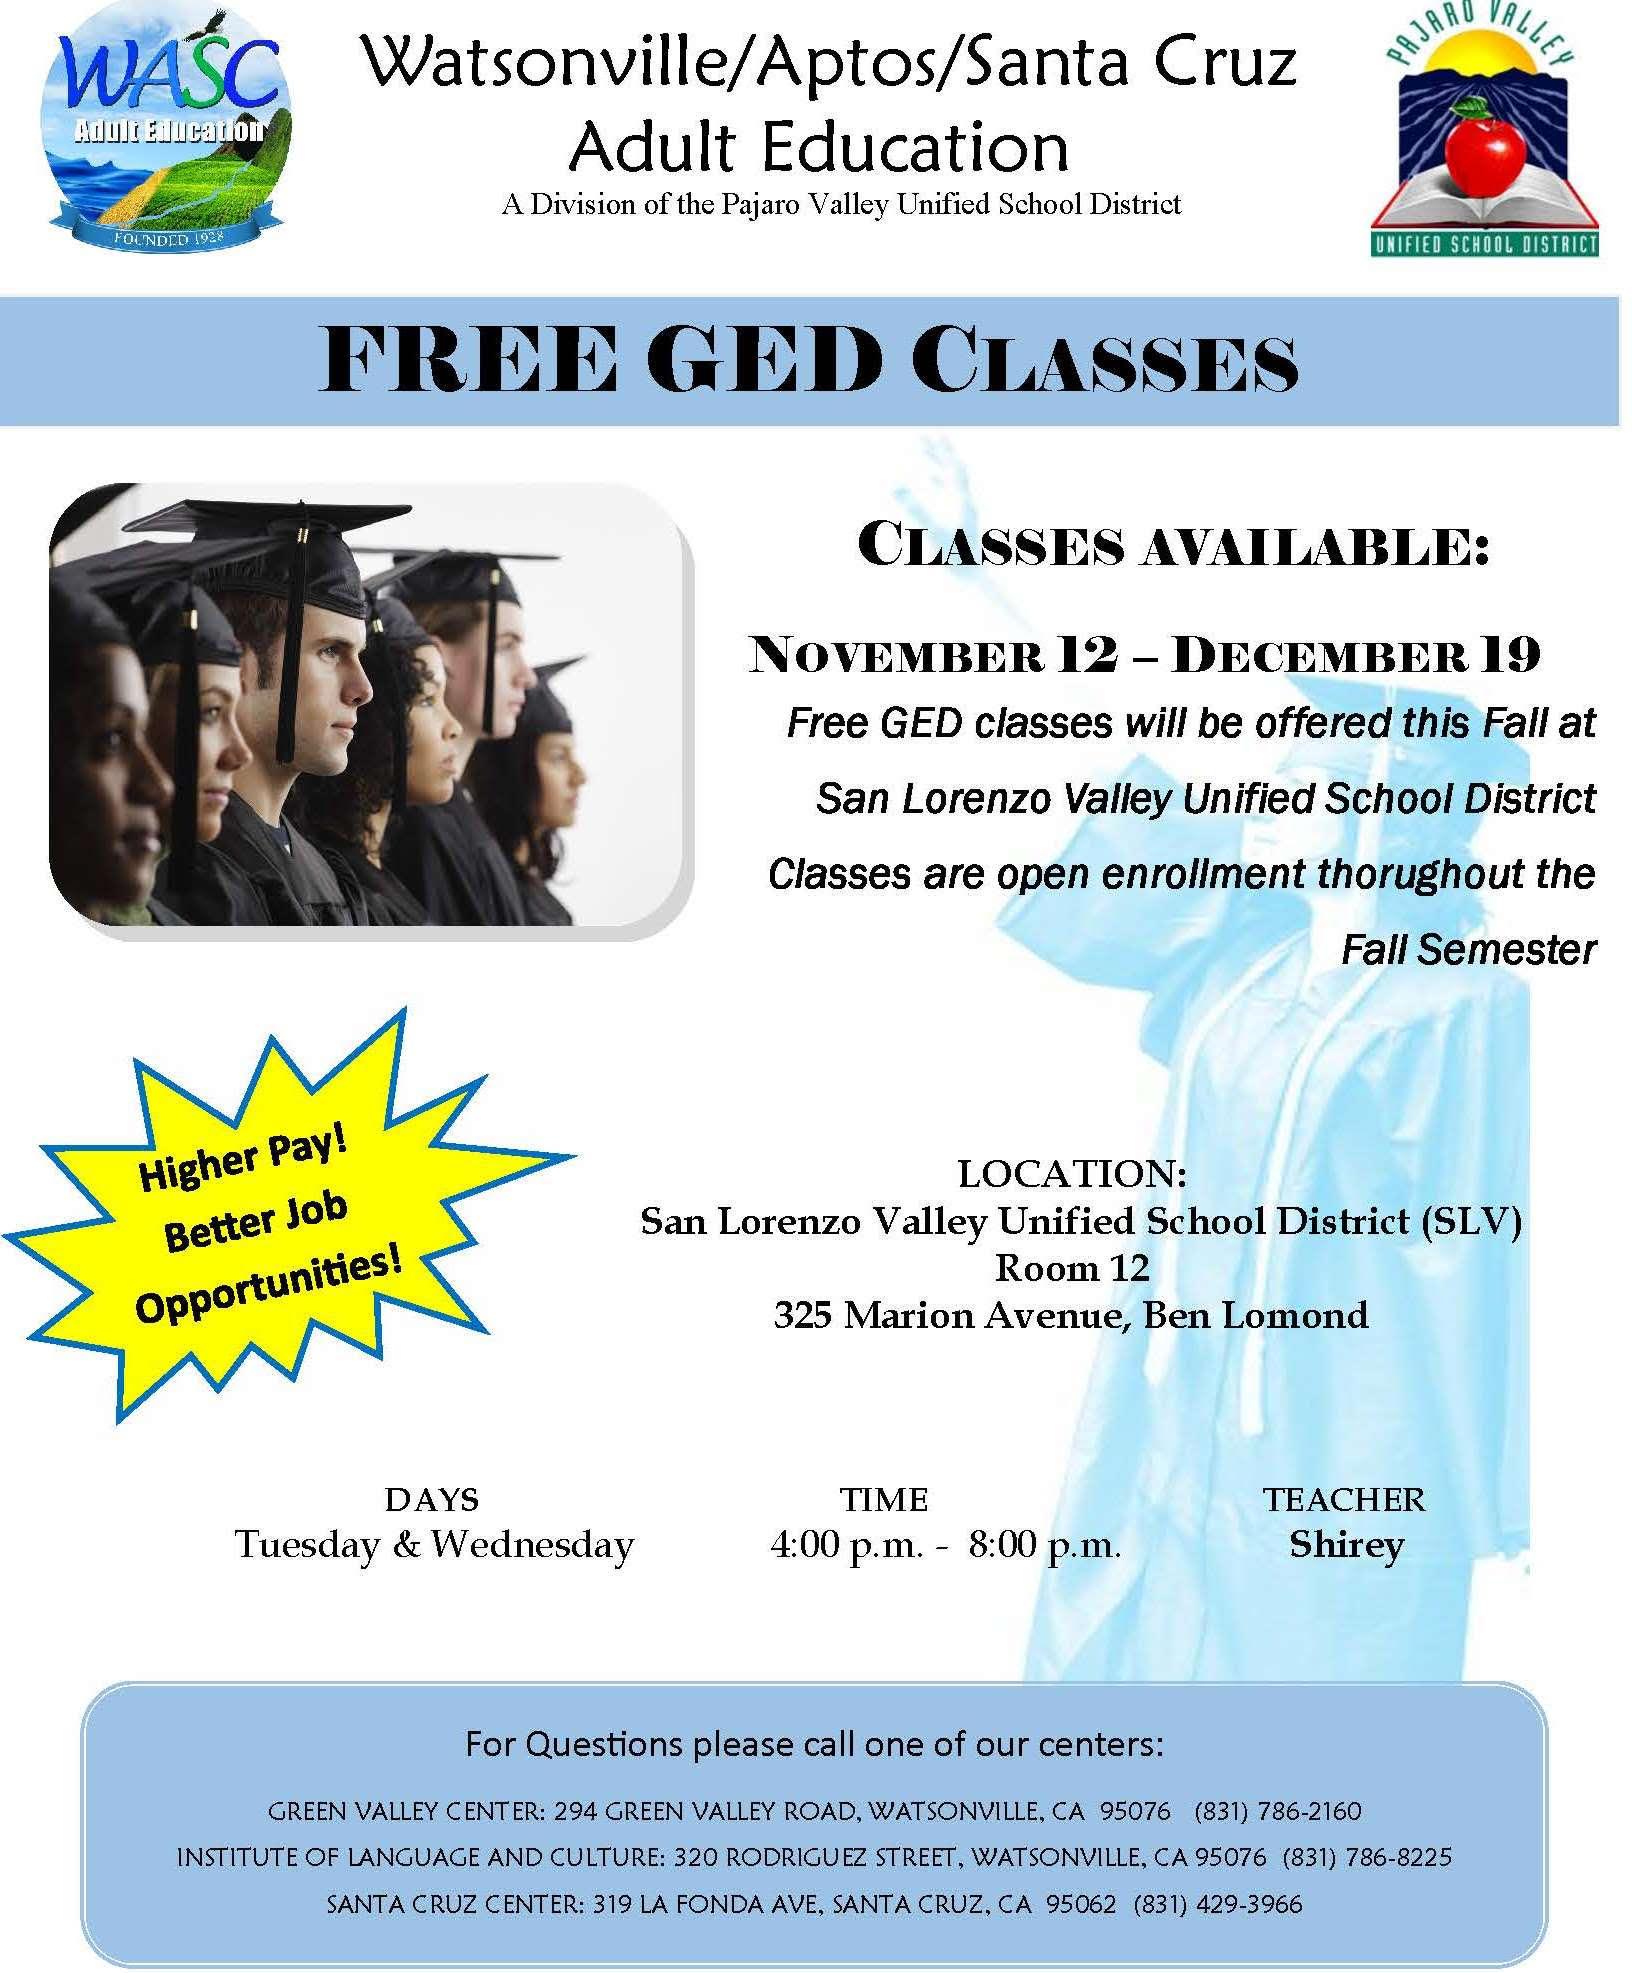 Free GED Classes starting November 12; call 831-786-2160 for information